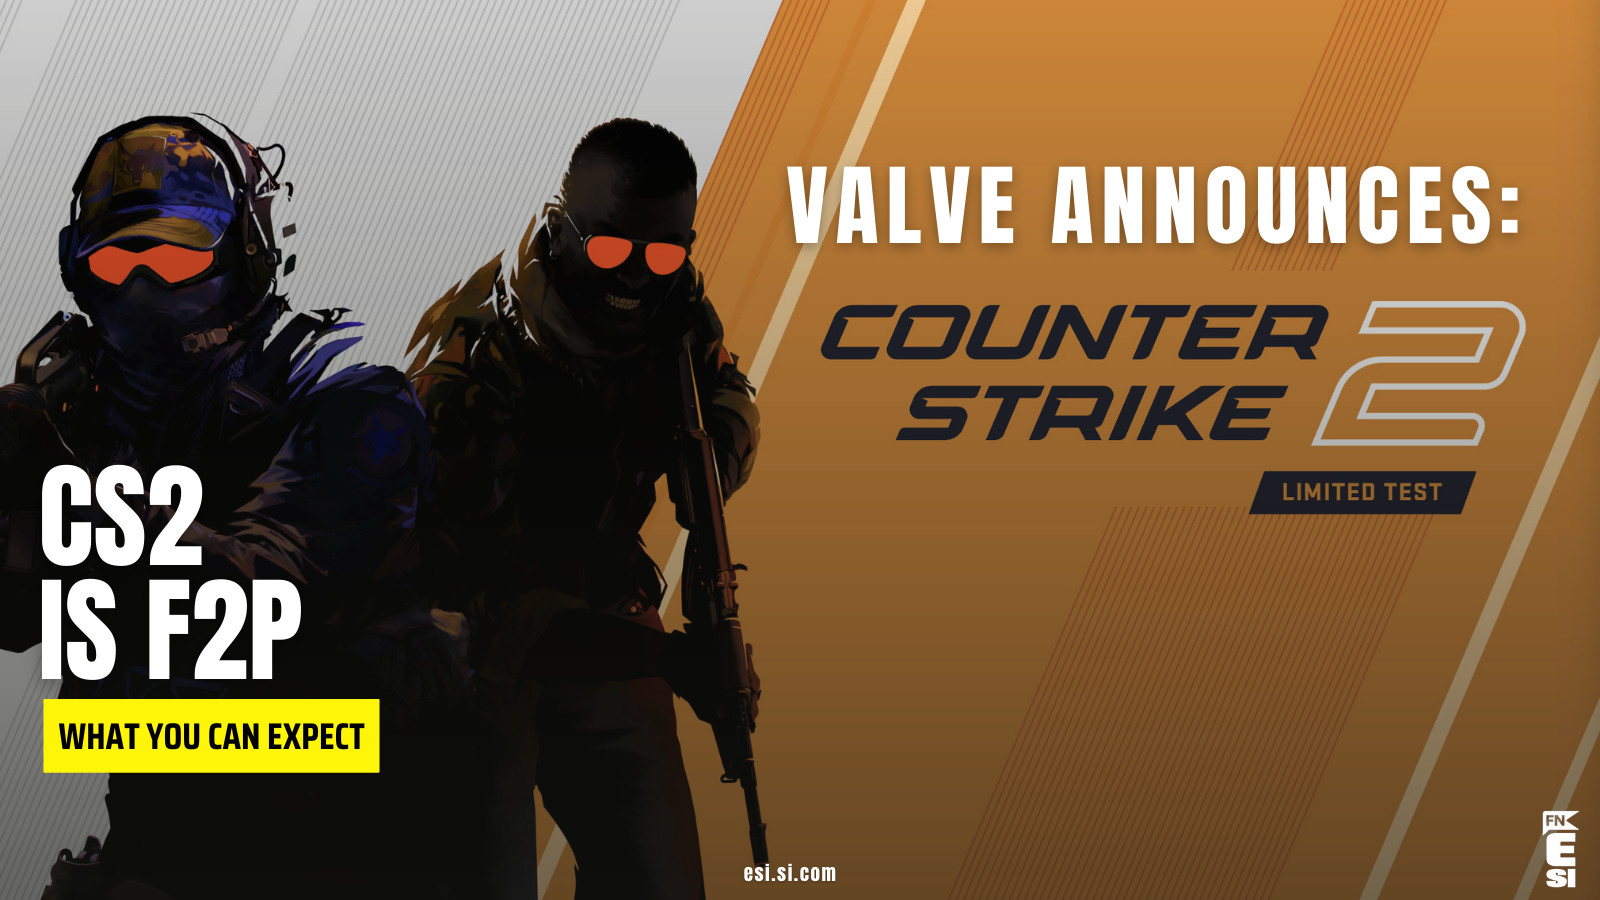 There are new rumours Counter-Strike 2 could launch this month with a beta